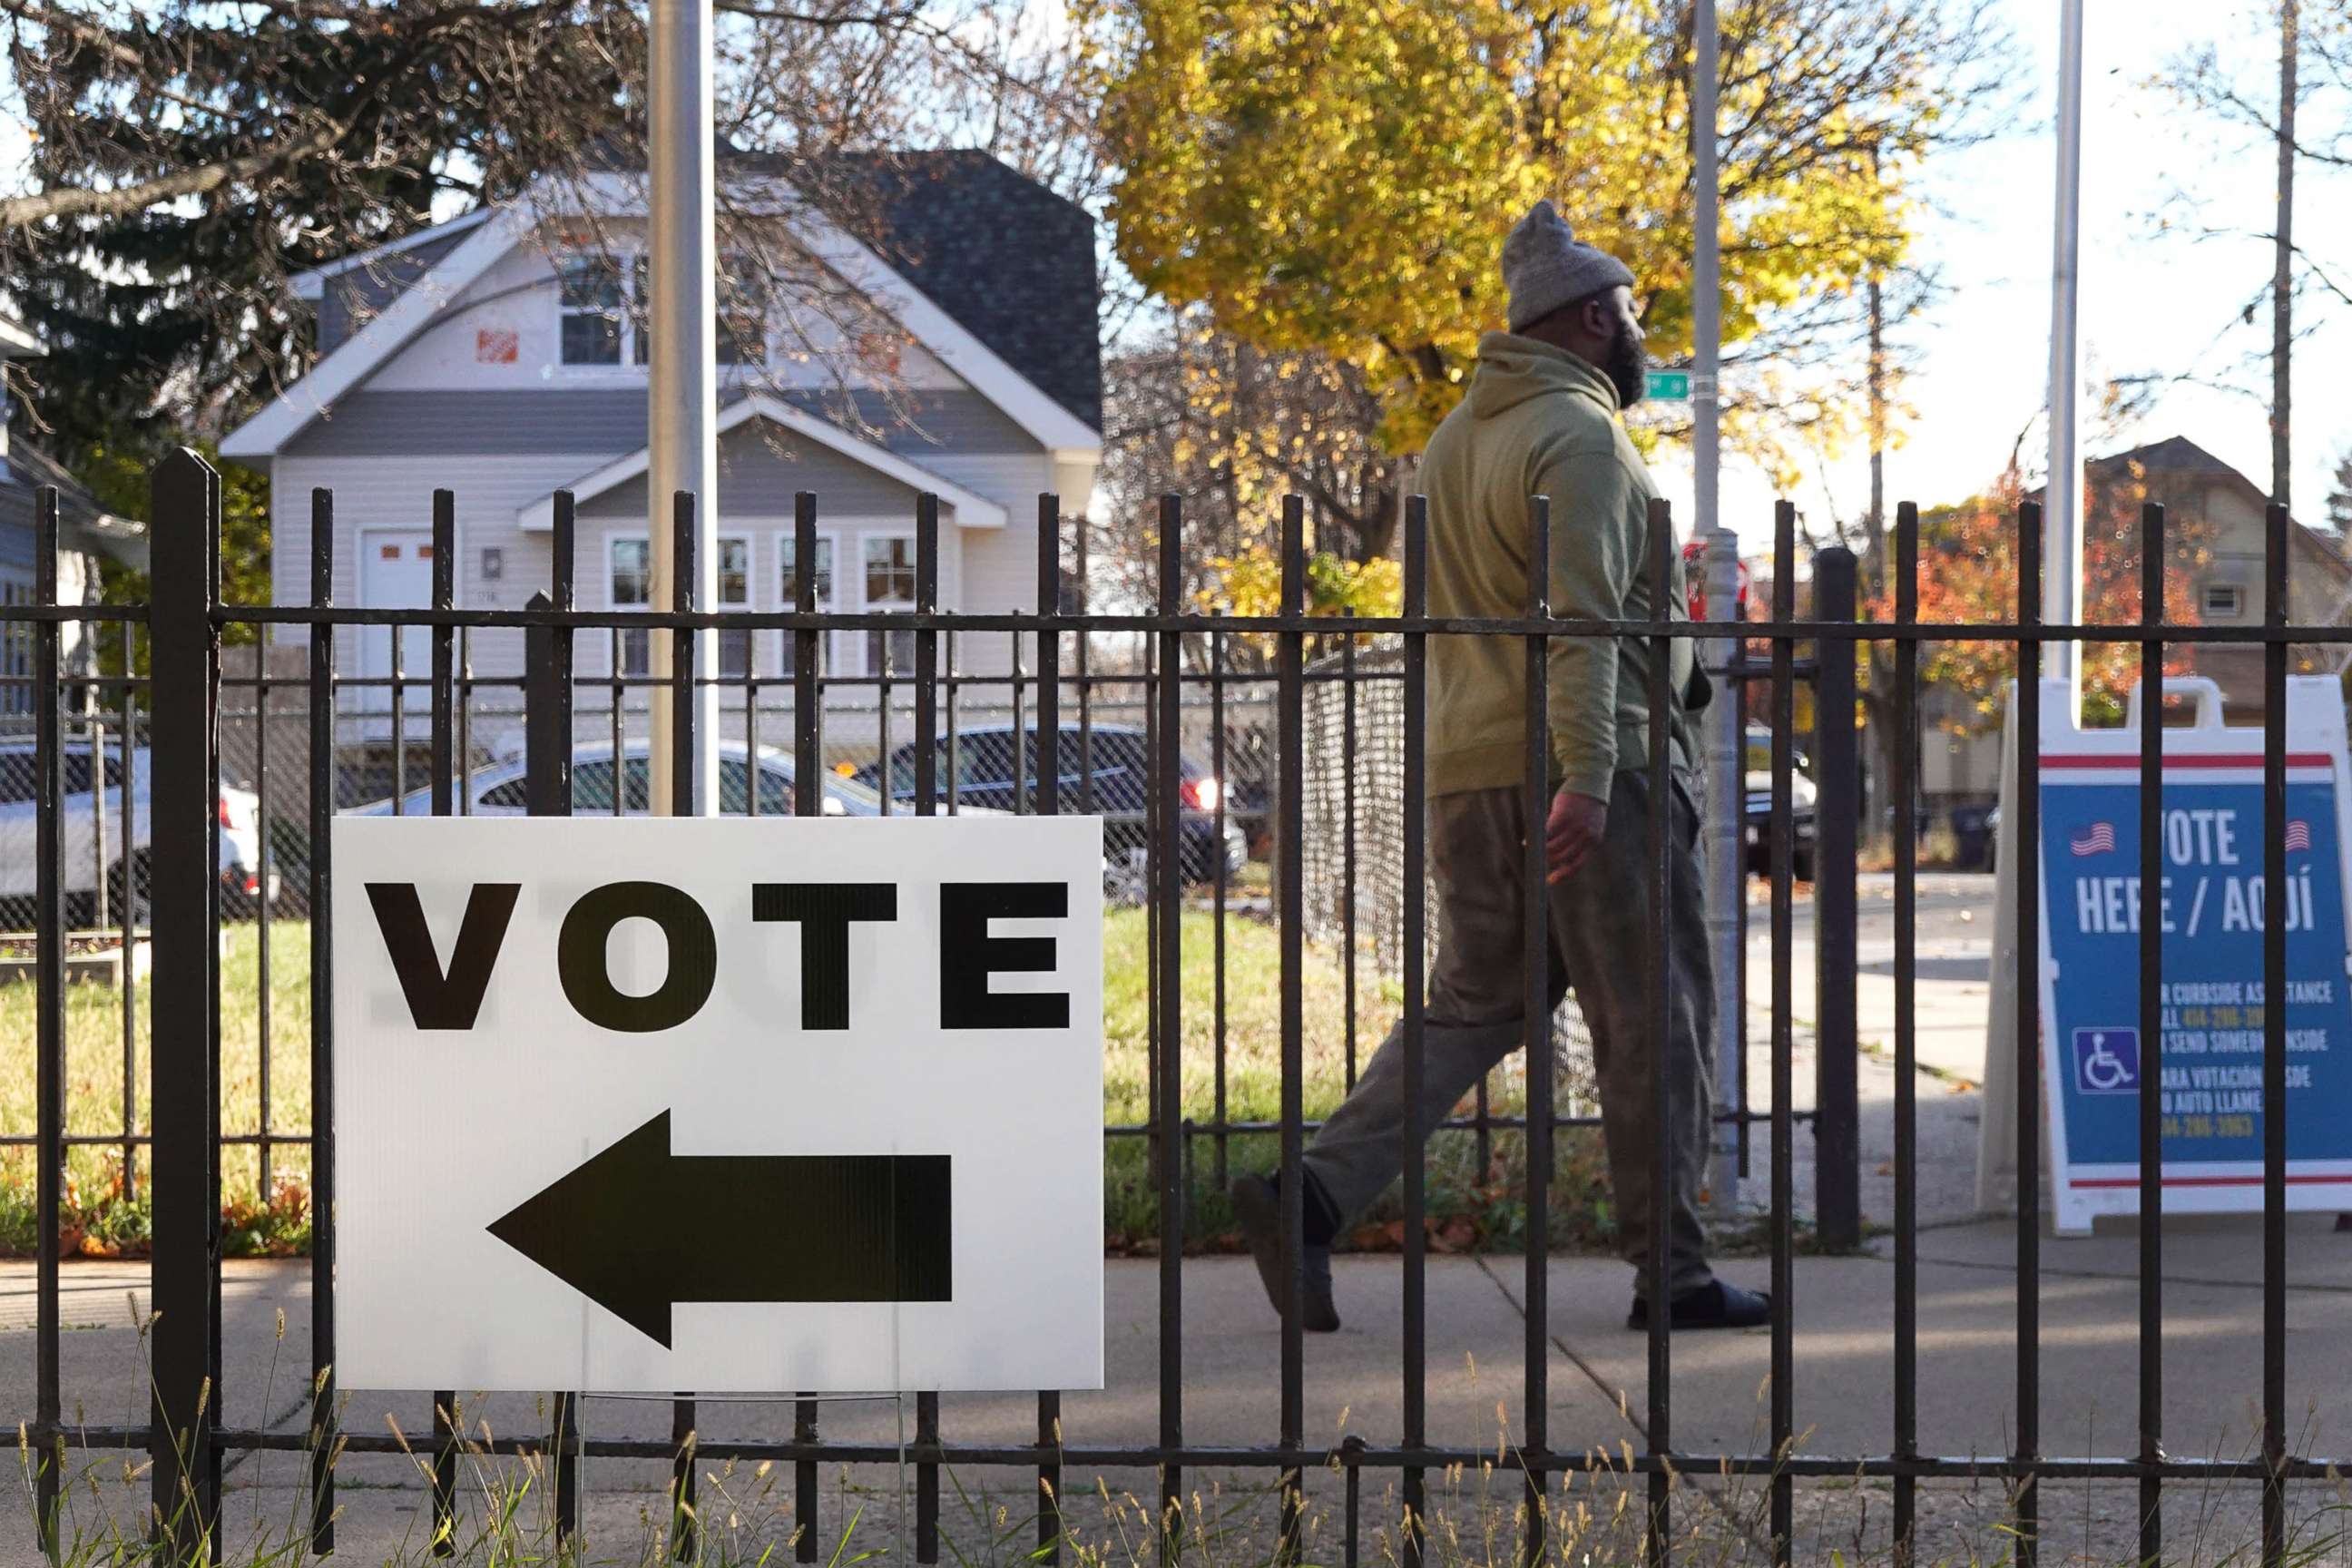 PHOTO: A sign directs voters at a polling place, Nov. 08, 2022 in Milwaukee.